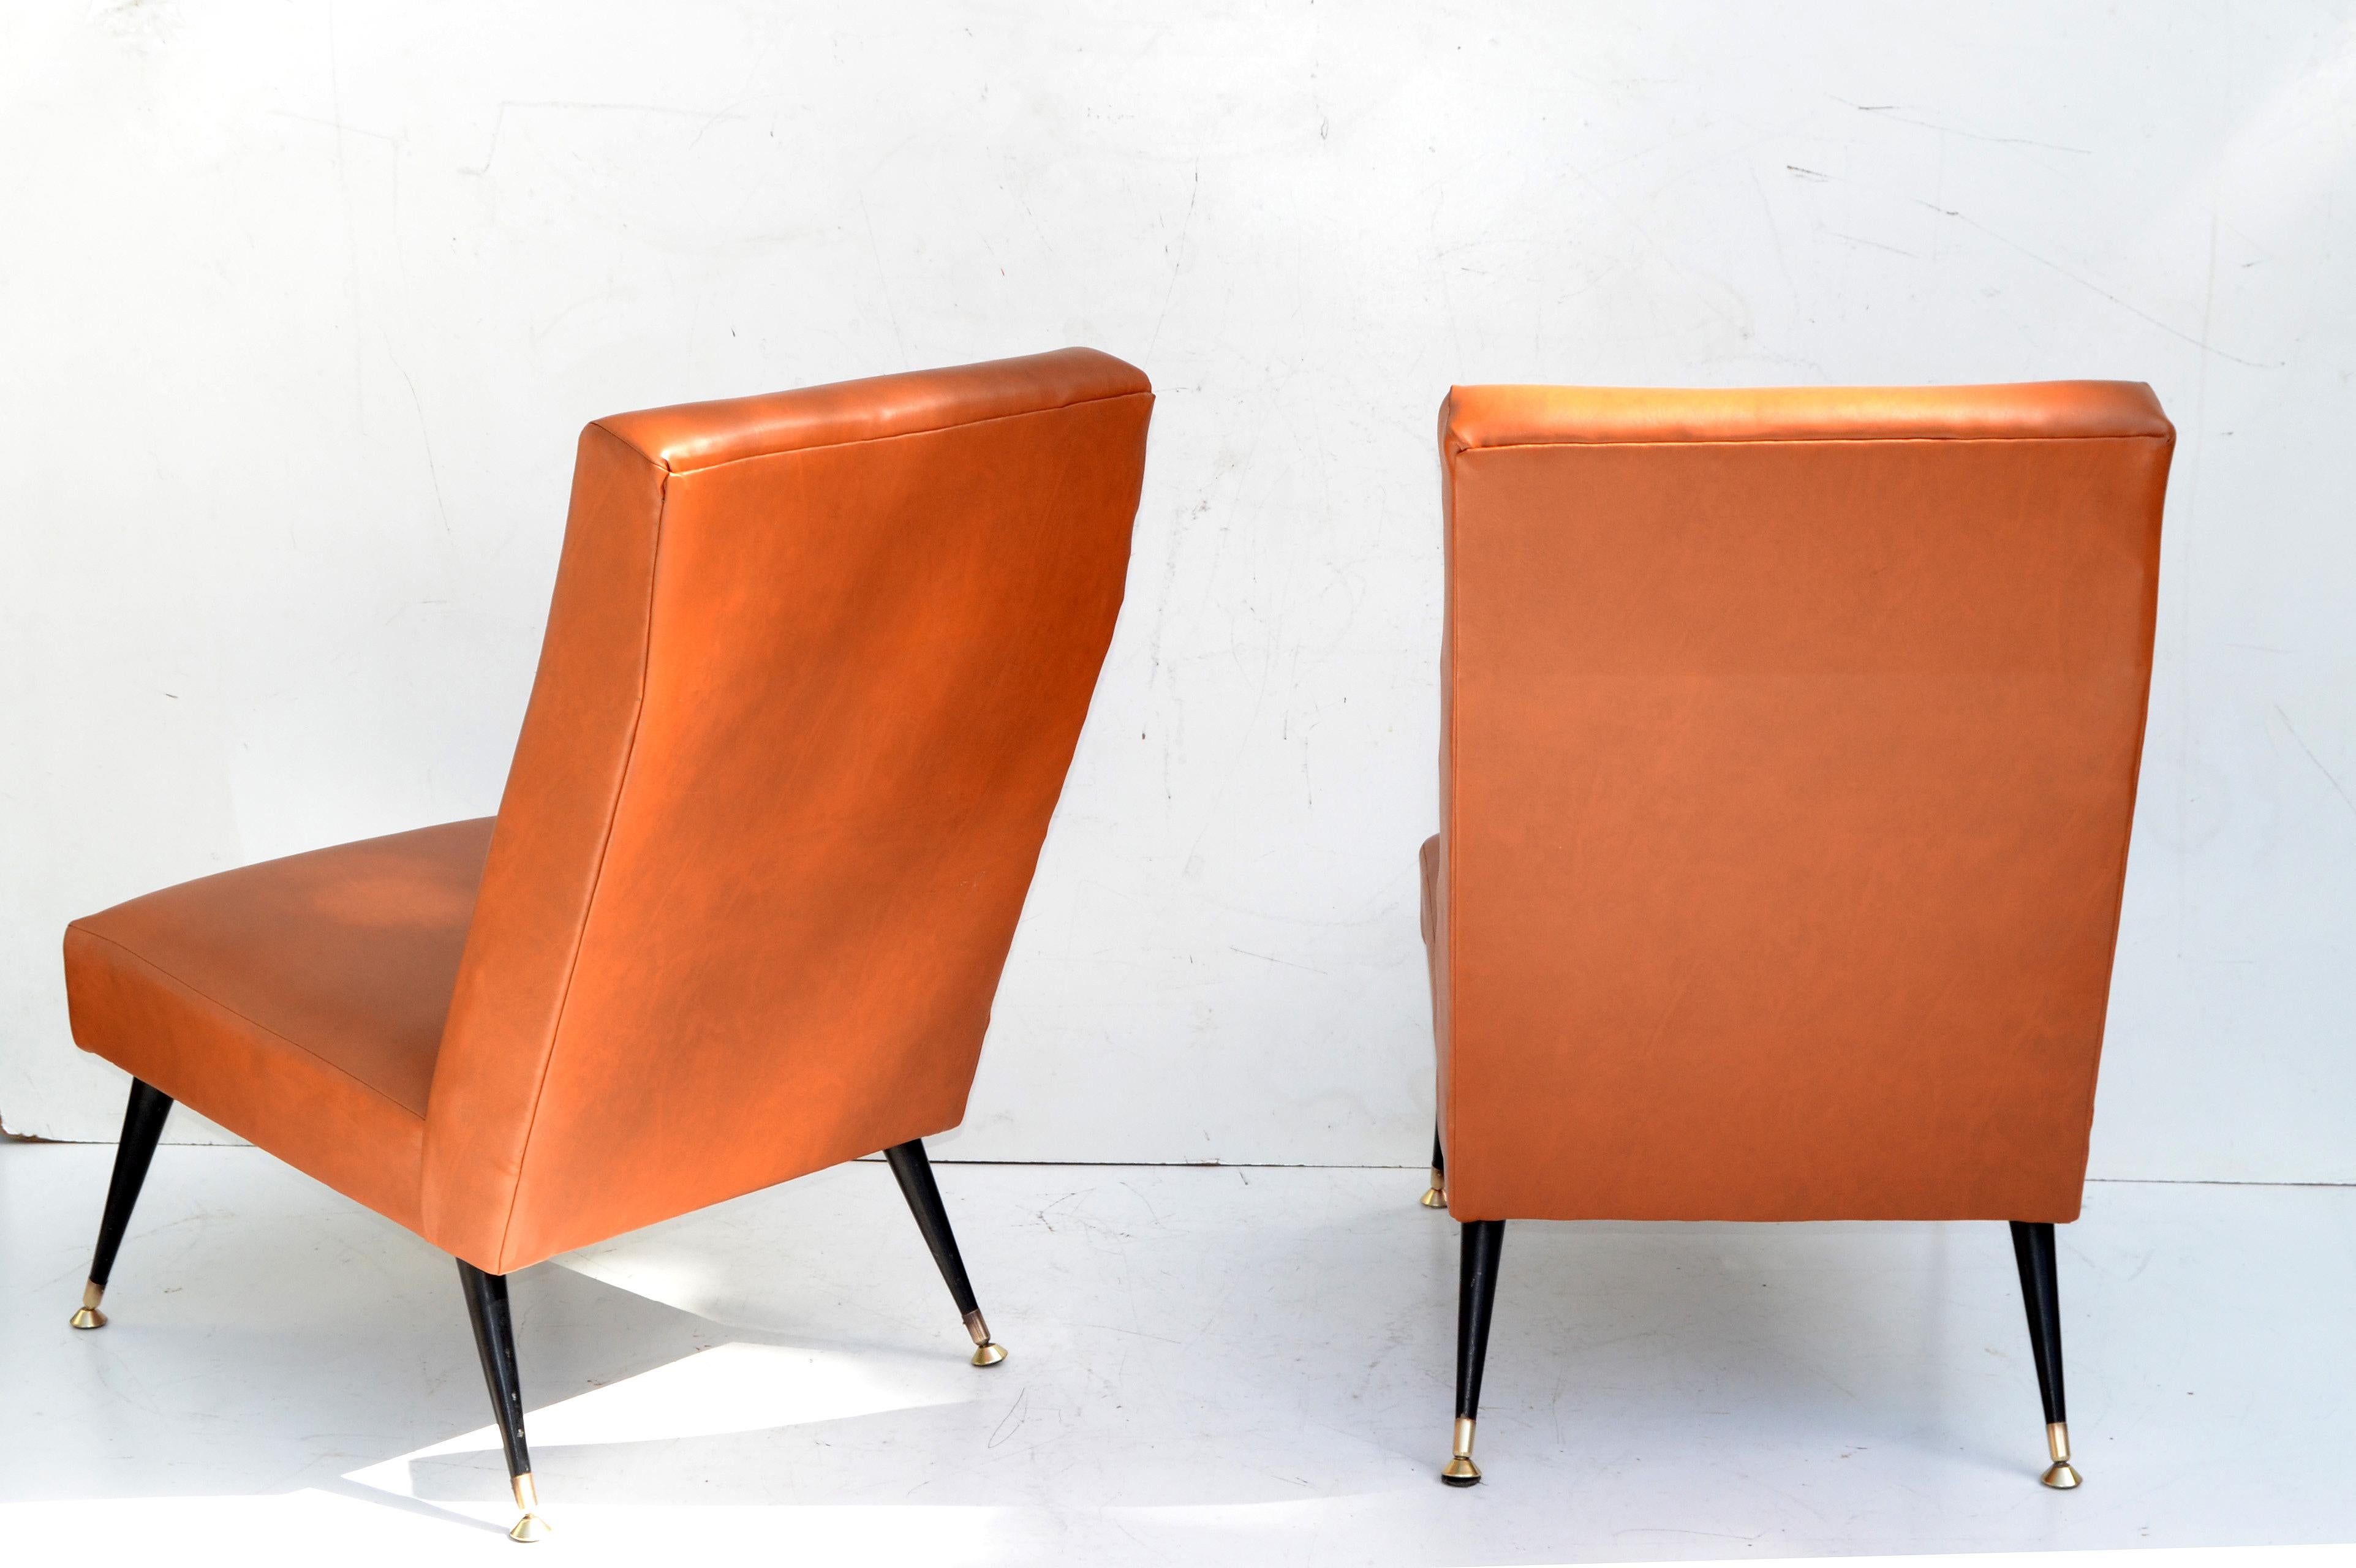 Mid-20th Century Pair of Marco Zanuso Brown Leather & Brass Slipper Chairs by Arflex Italy 1955 For Sale